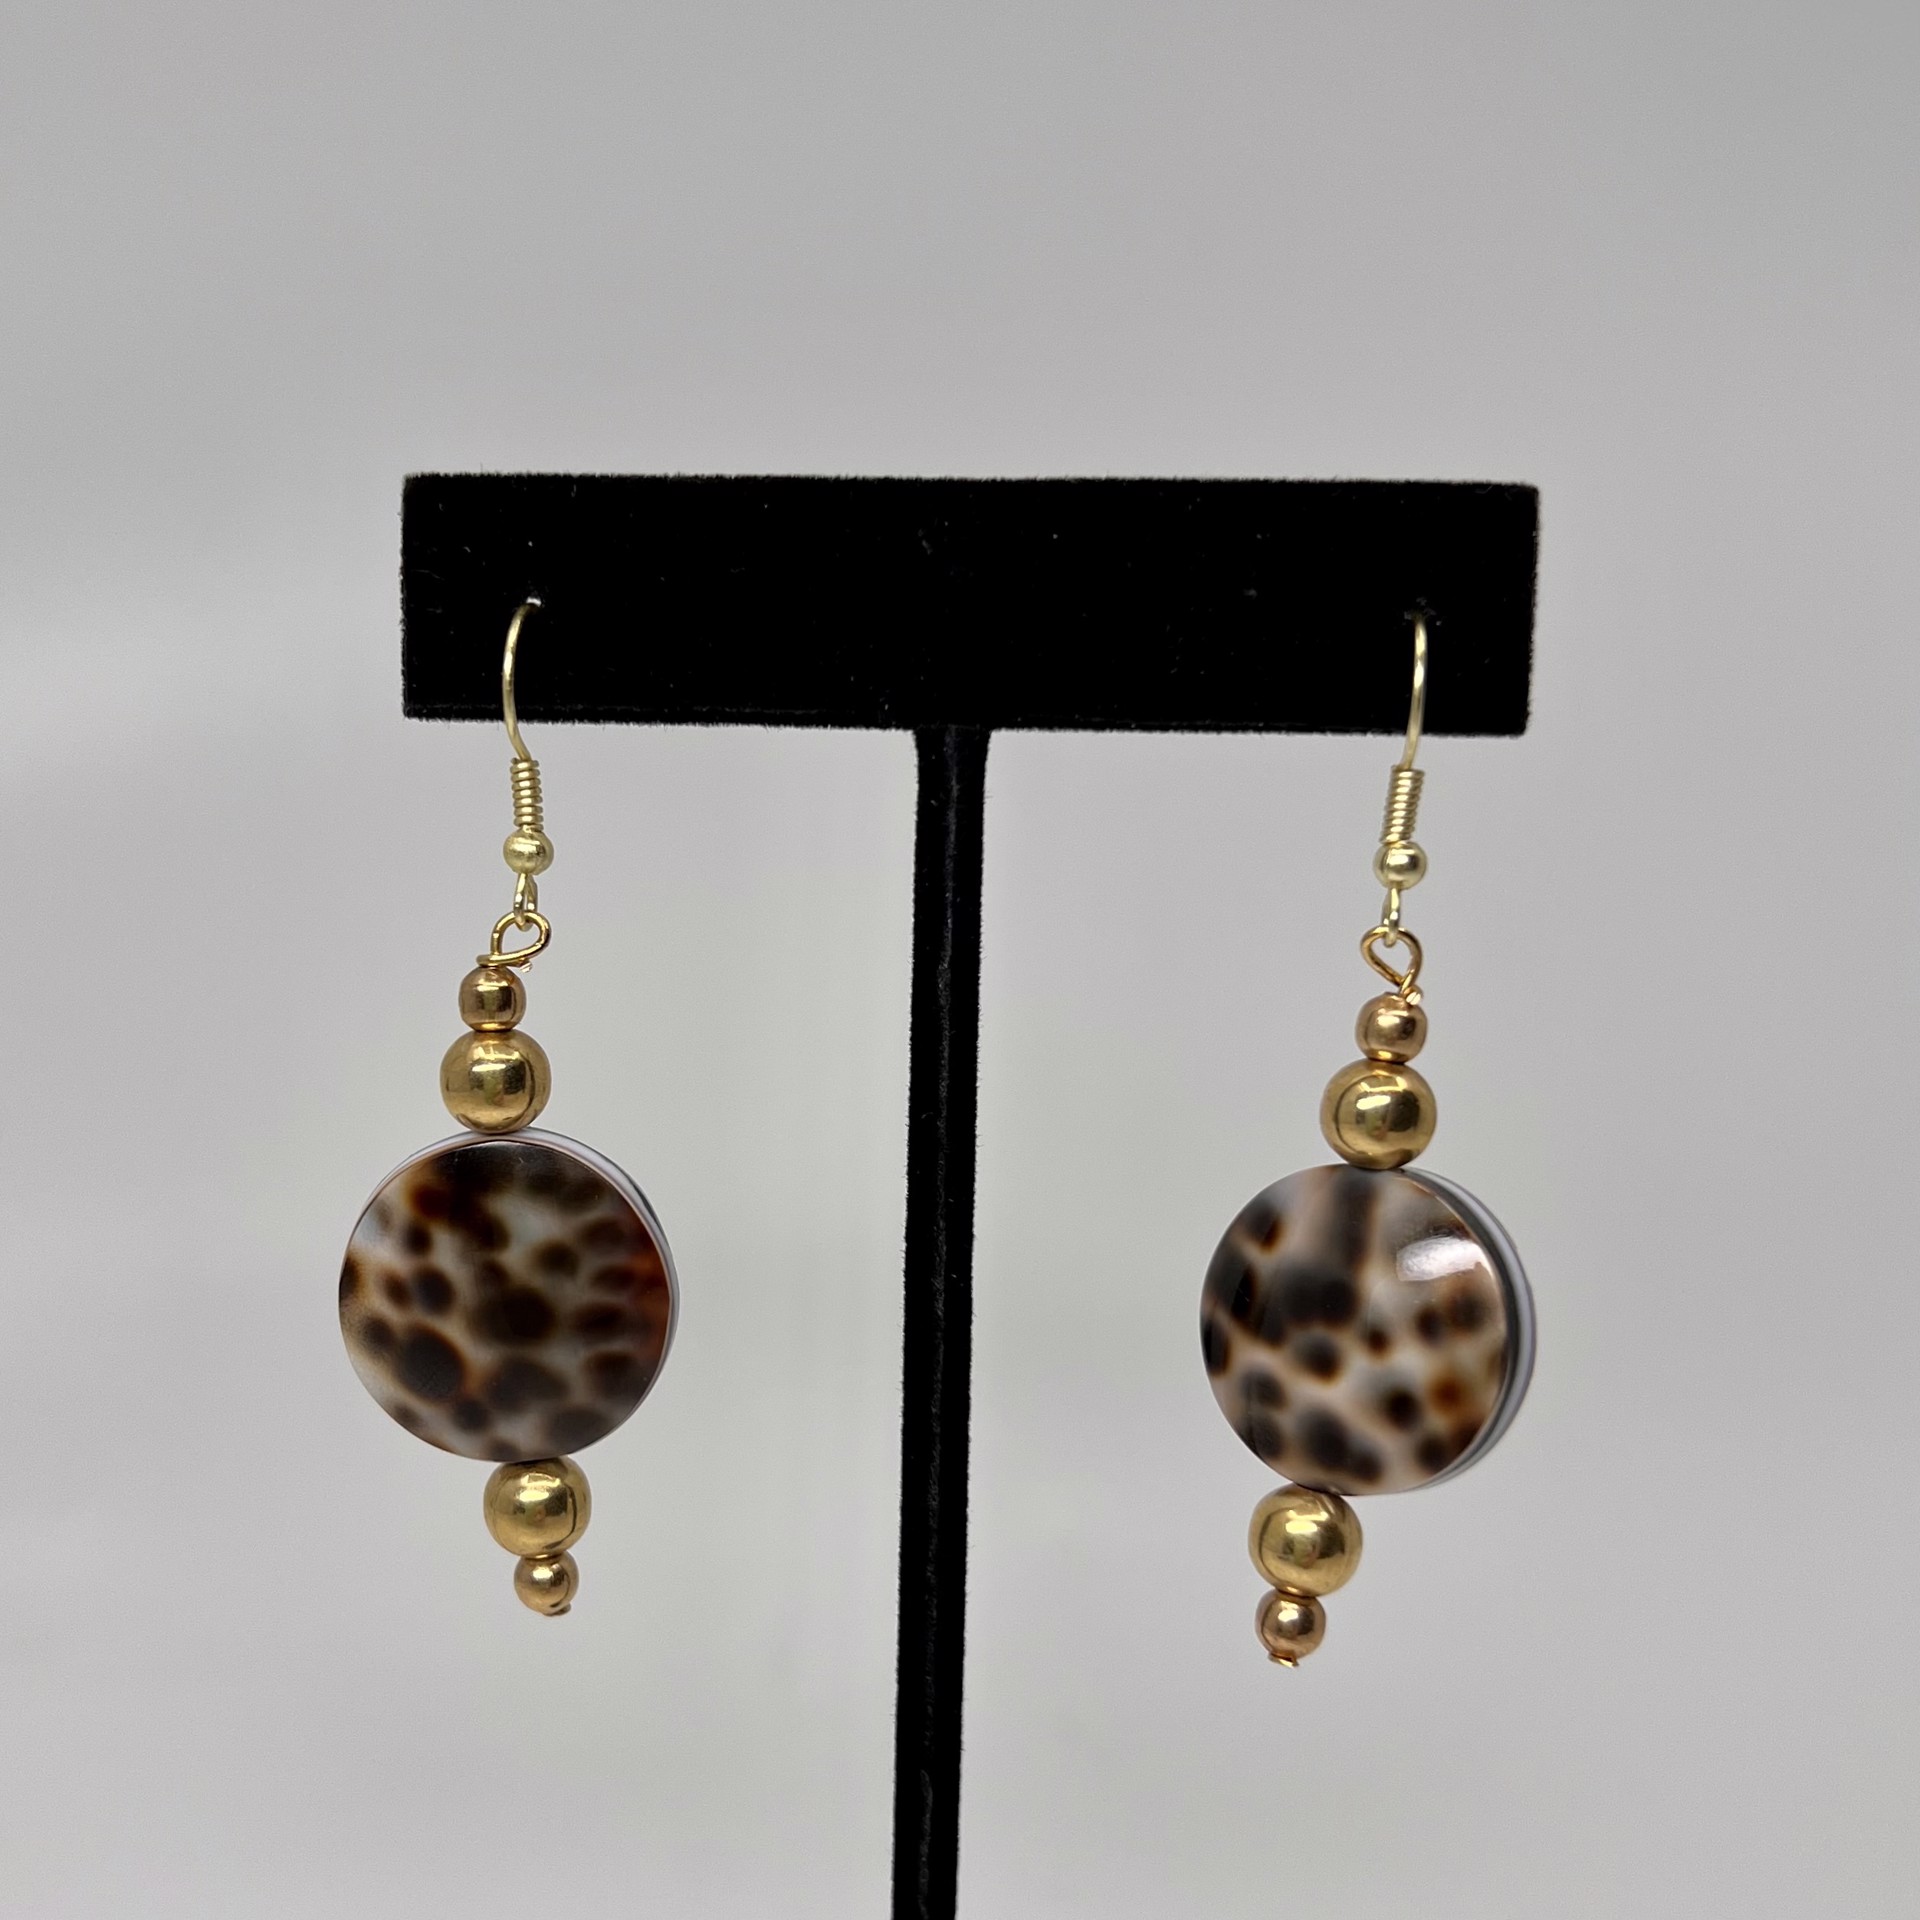 Tiger Shell Earring with Gold Beads One Stone by Gina Caruso